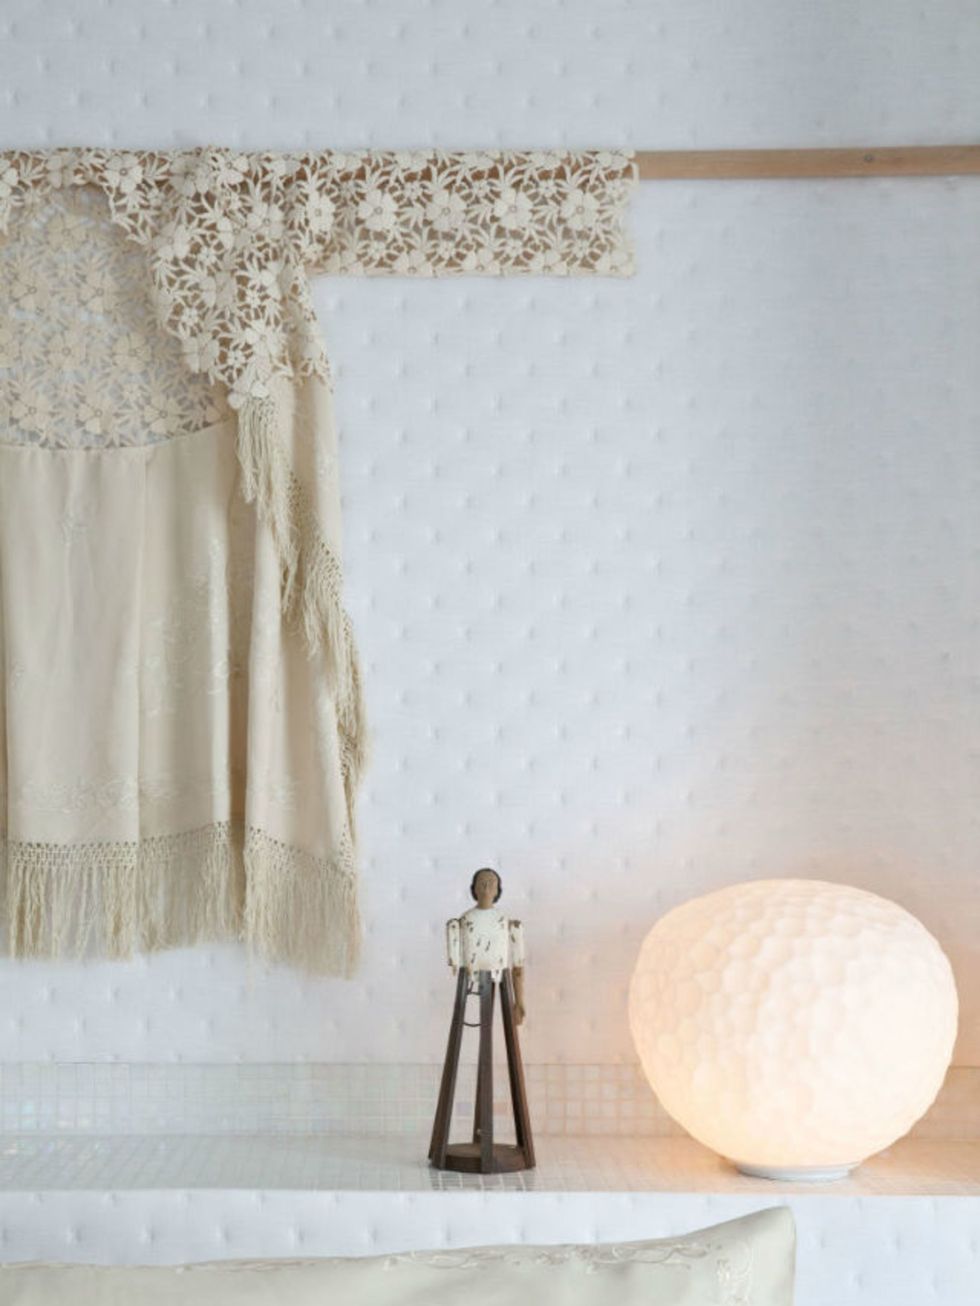 Wall, Interior design, Lighting accessory, Beige, Embellishment, Linens, Still life photography, Lace, Lampshade, Shadow, 